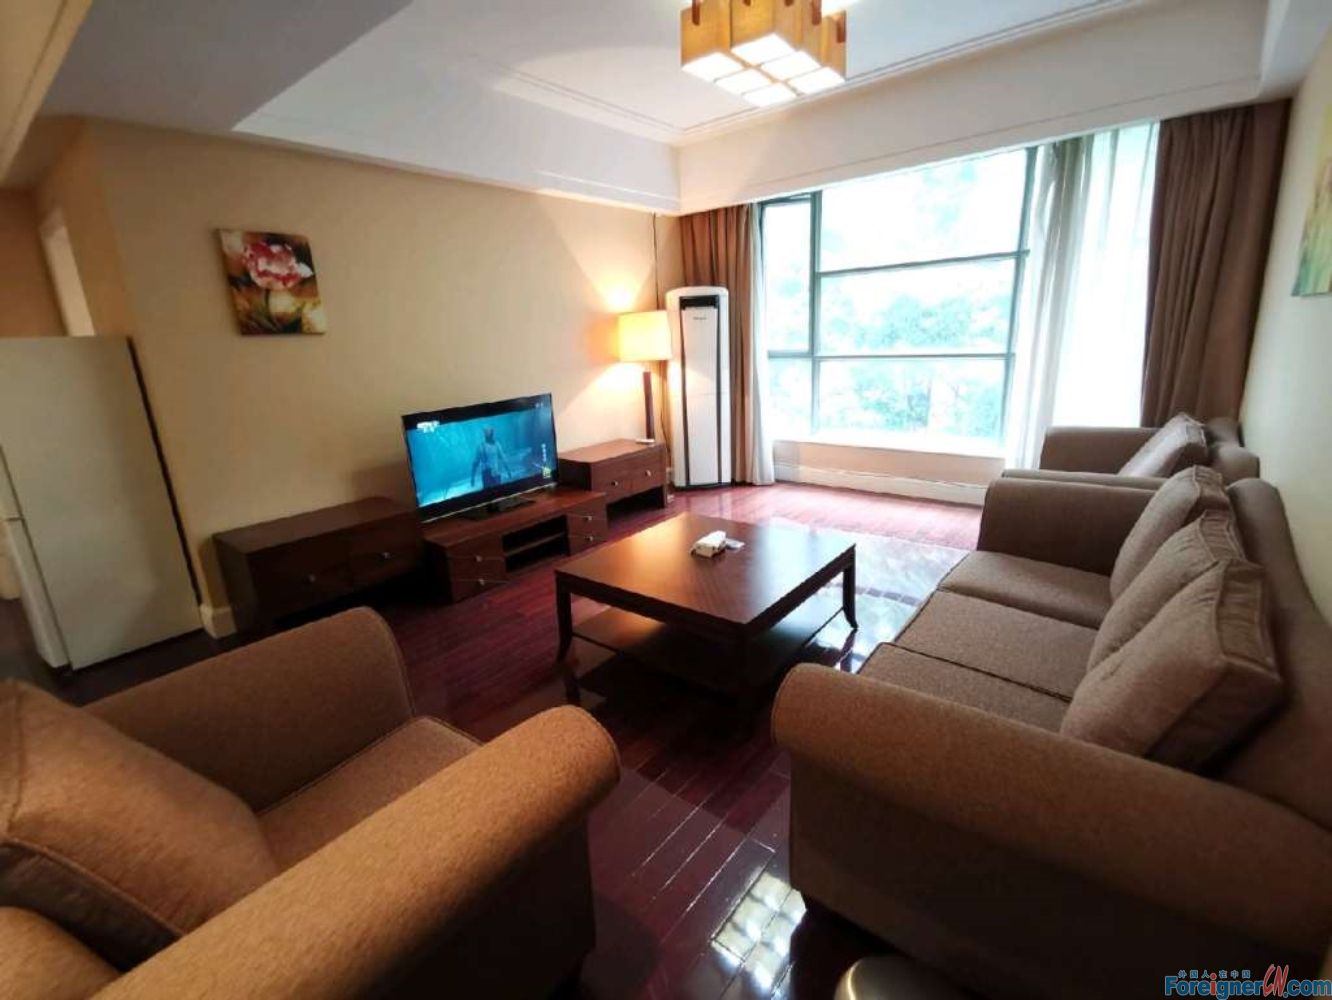 Stunning! ! nice apartment rent in Suzhou/ 2 bedrooms and 2 bathrooms/ Neat and fully-furnished/close to Jinji Lake/Suzhou Center Shopping Mall/ subway station Nearby/LiGongDi Station